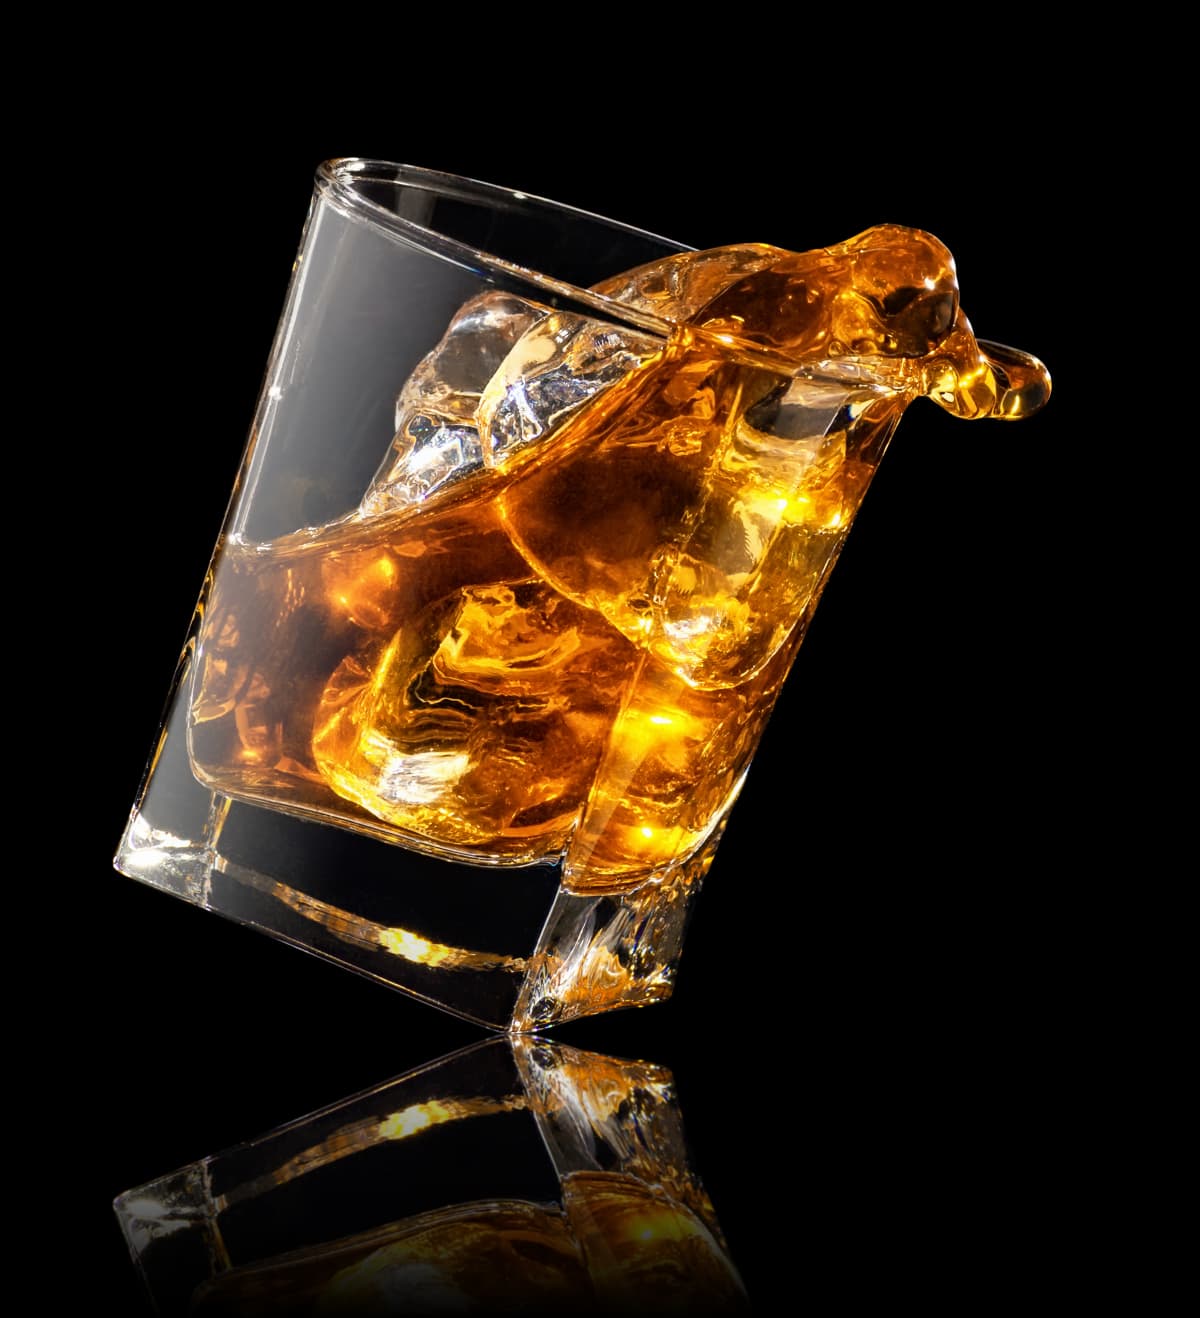 A splash of whiskey in a glass